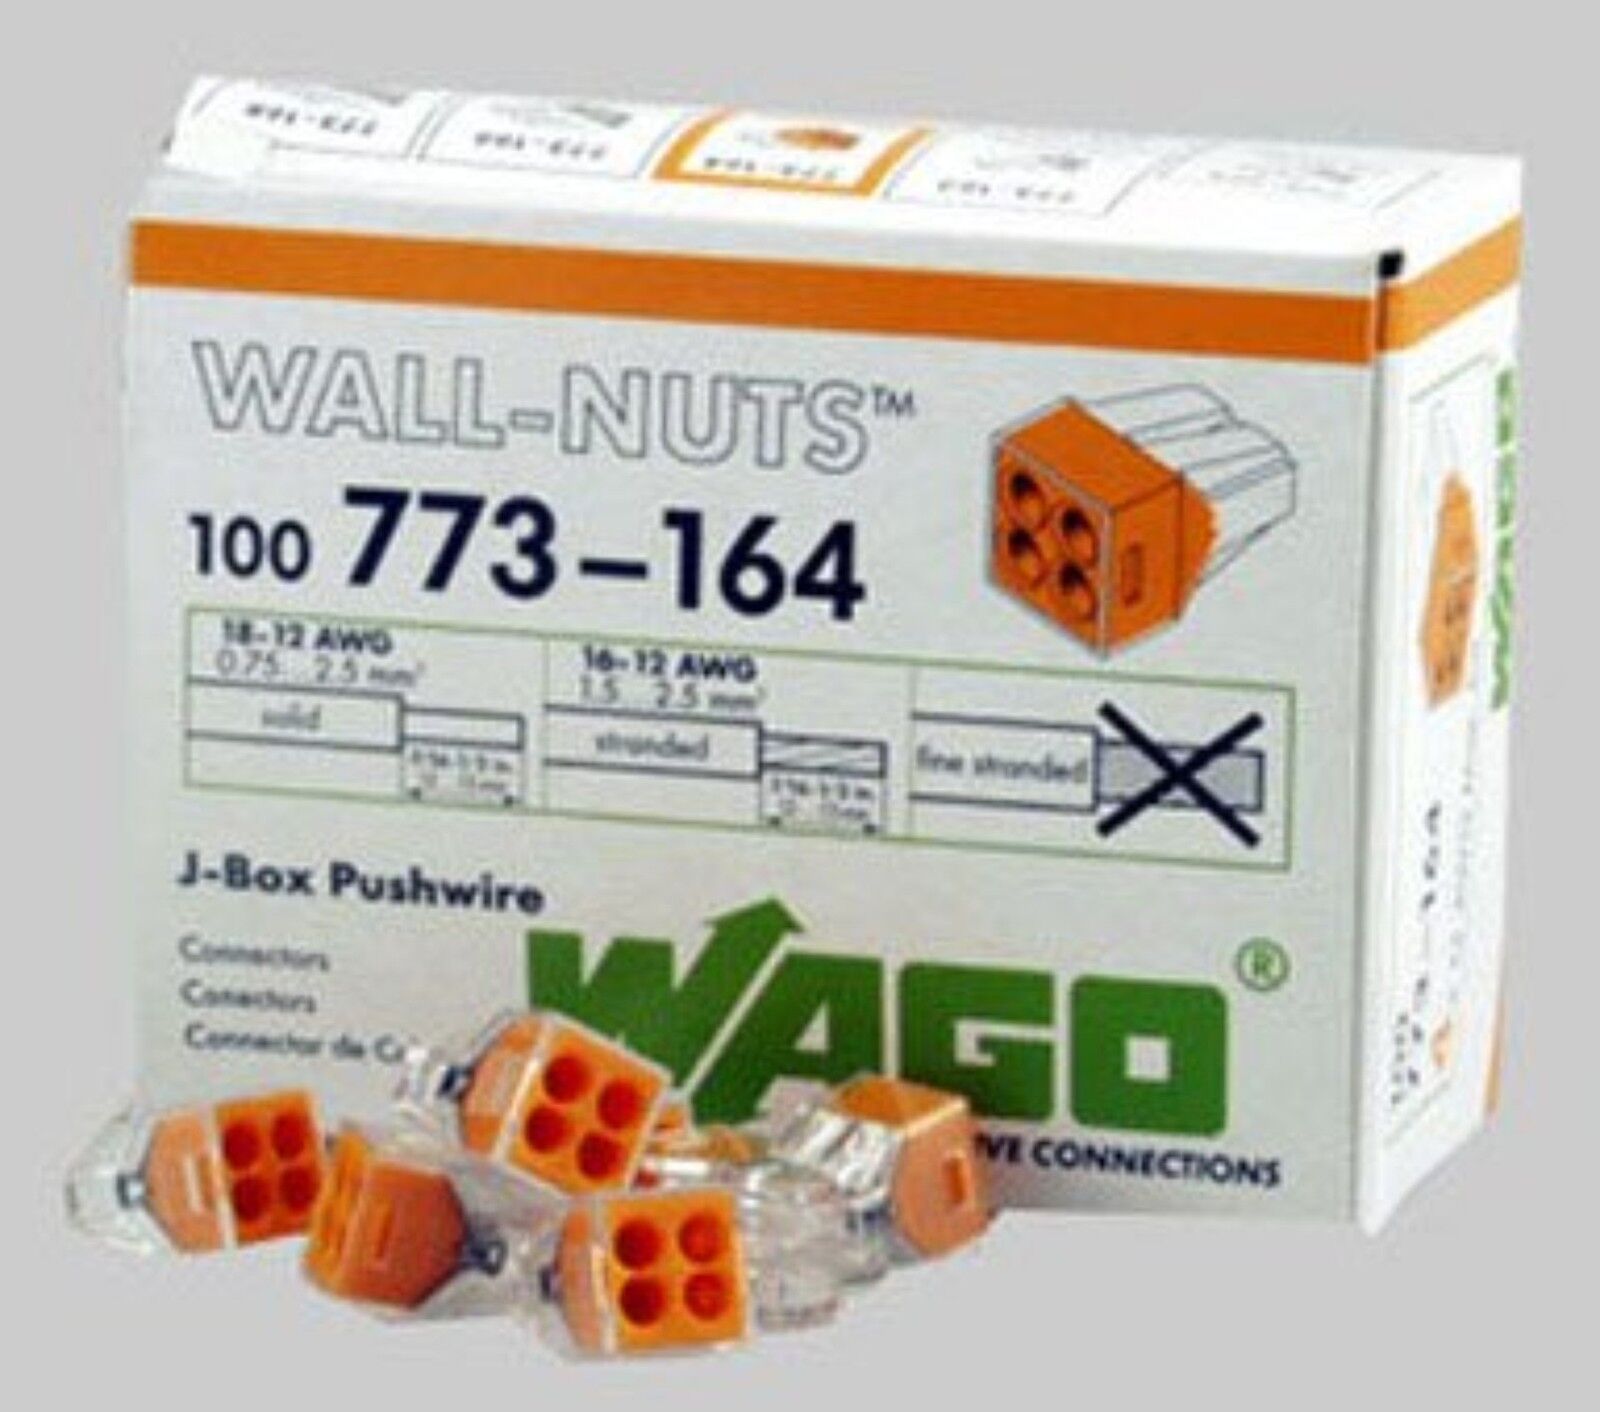 Wago 773-164 4-Pin PUSH WIRE? Connectors for Junction Boxes 100 PK